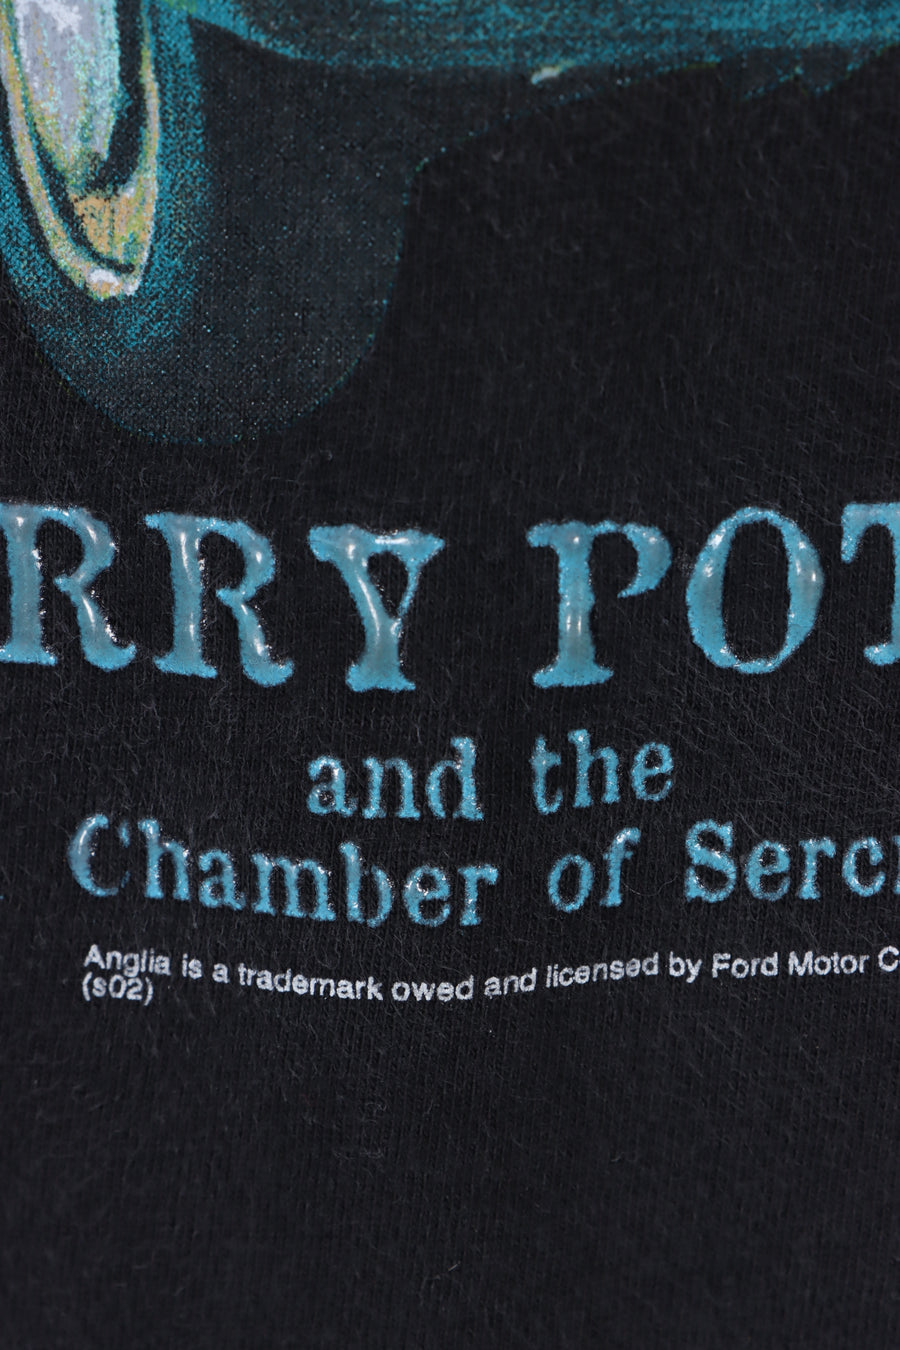 Harry Potter Chamber of Secrets 2002 Flying Ford Anglia T-Shirt (L)